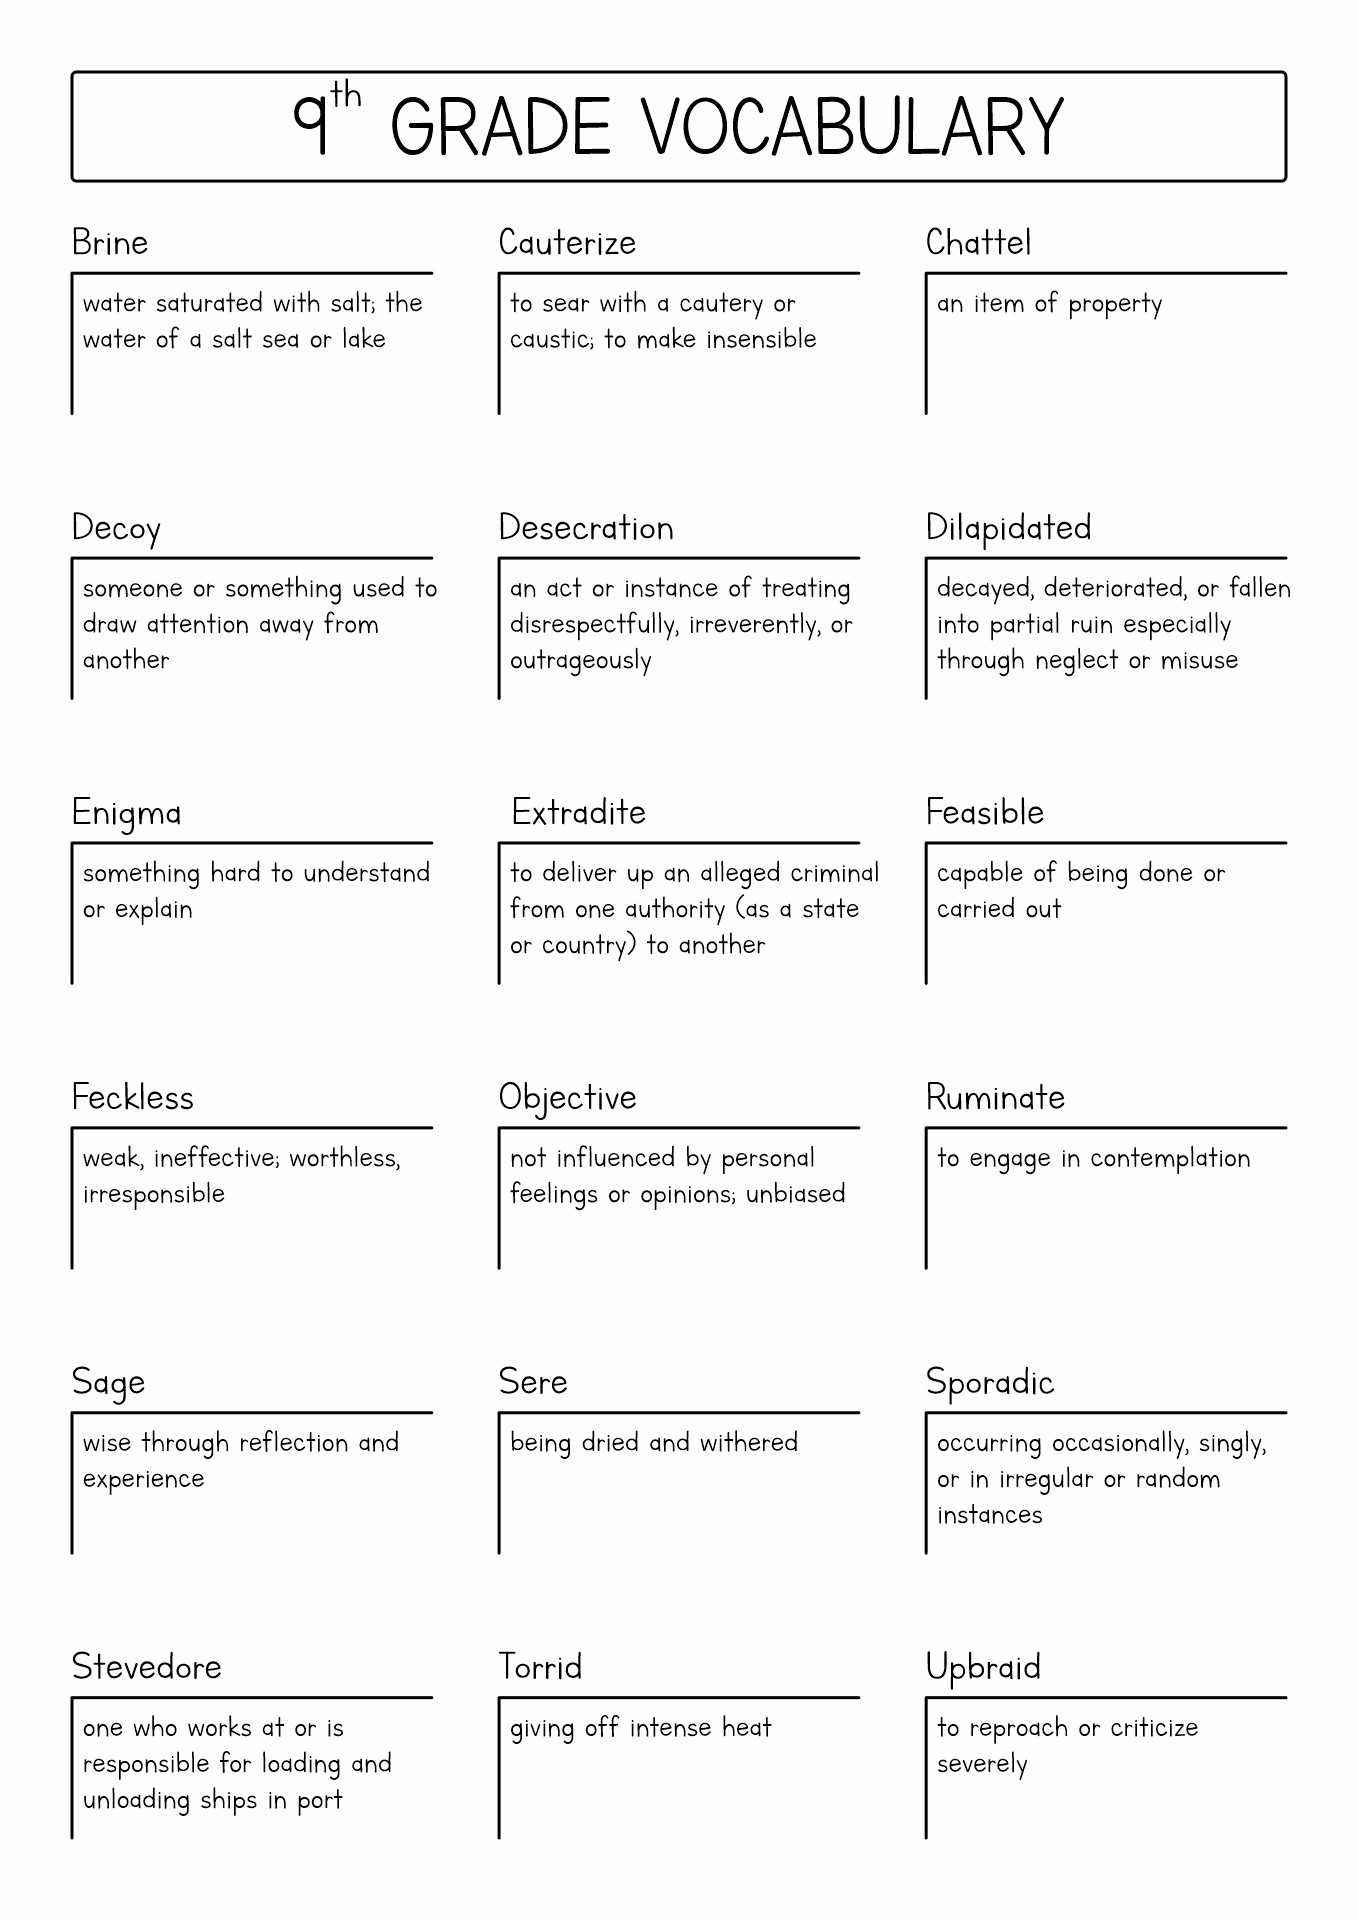 17-best-images-of-9th-grade-vocabulary-worksheets-9th-grade-spelling